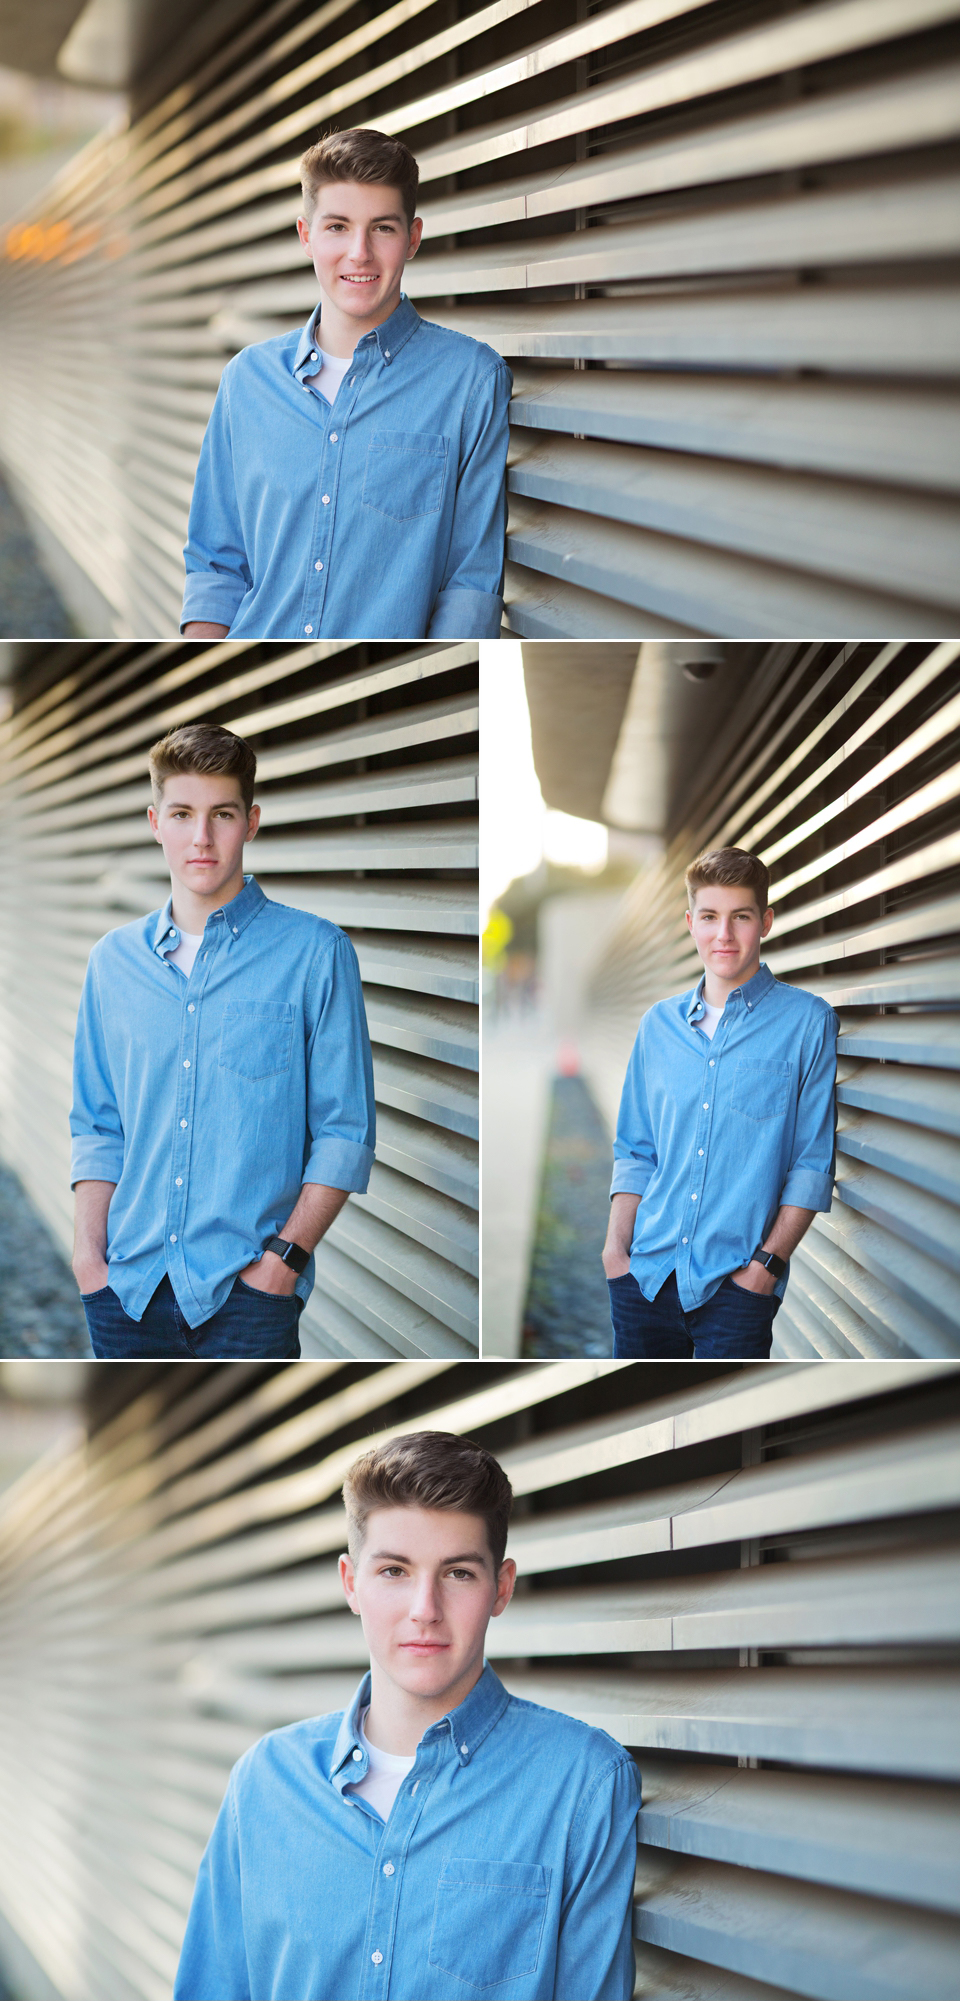 Collage of guy during high school portraits